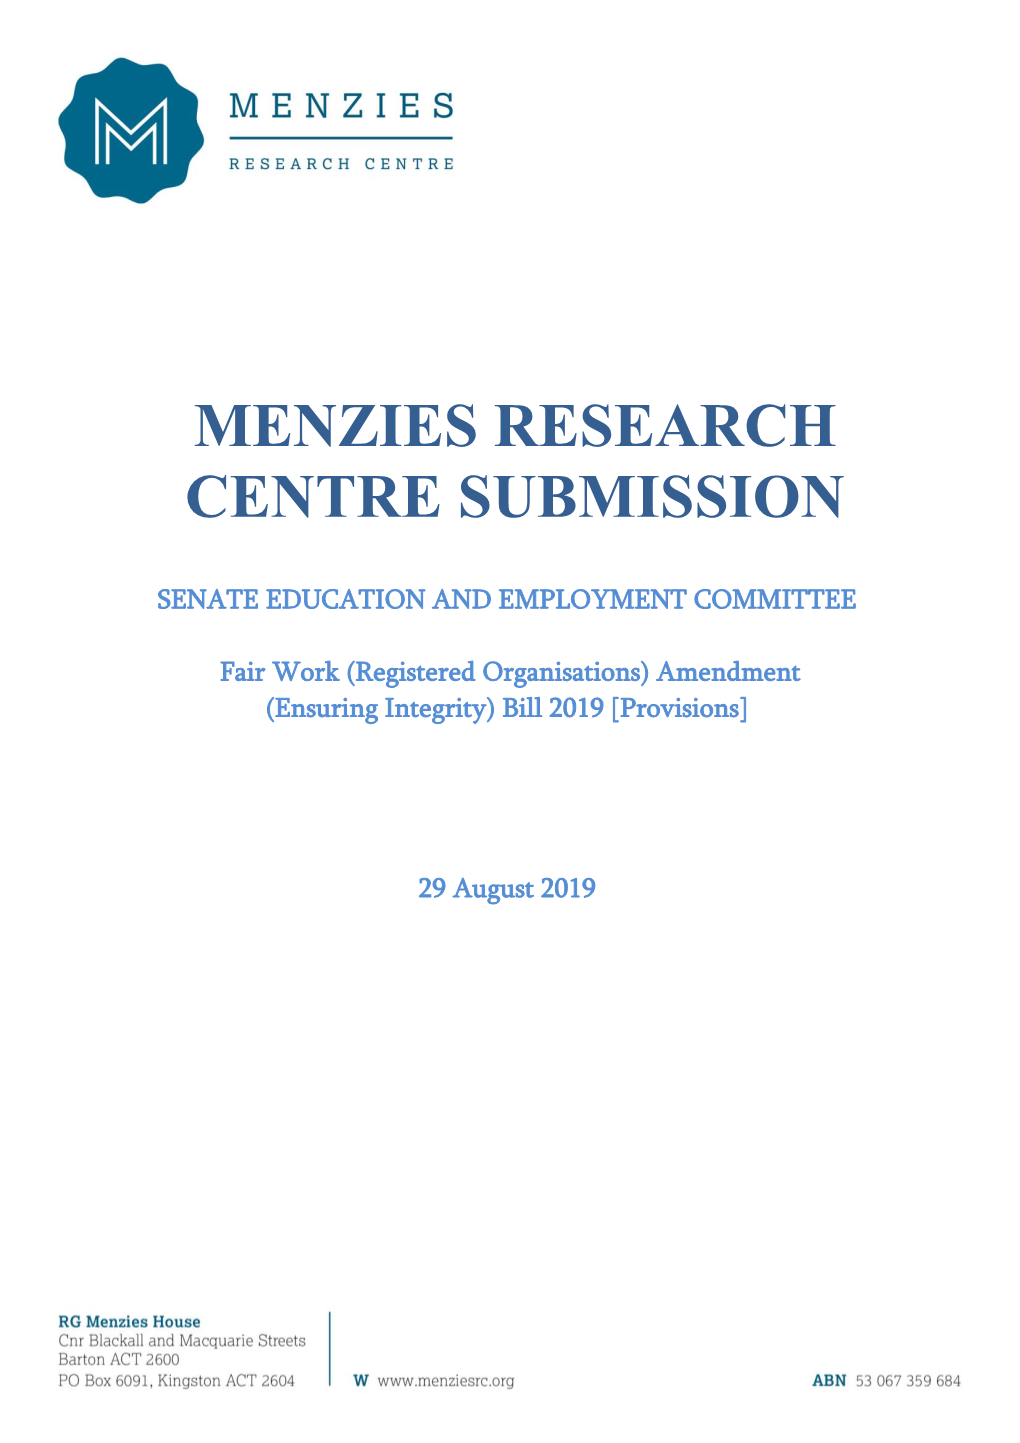 Menzies Research Centre Submission